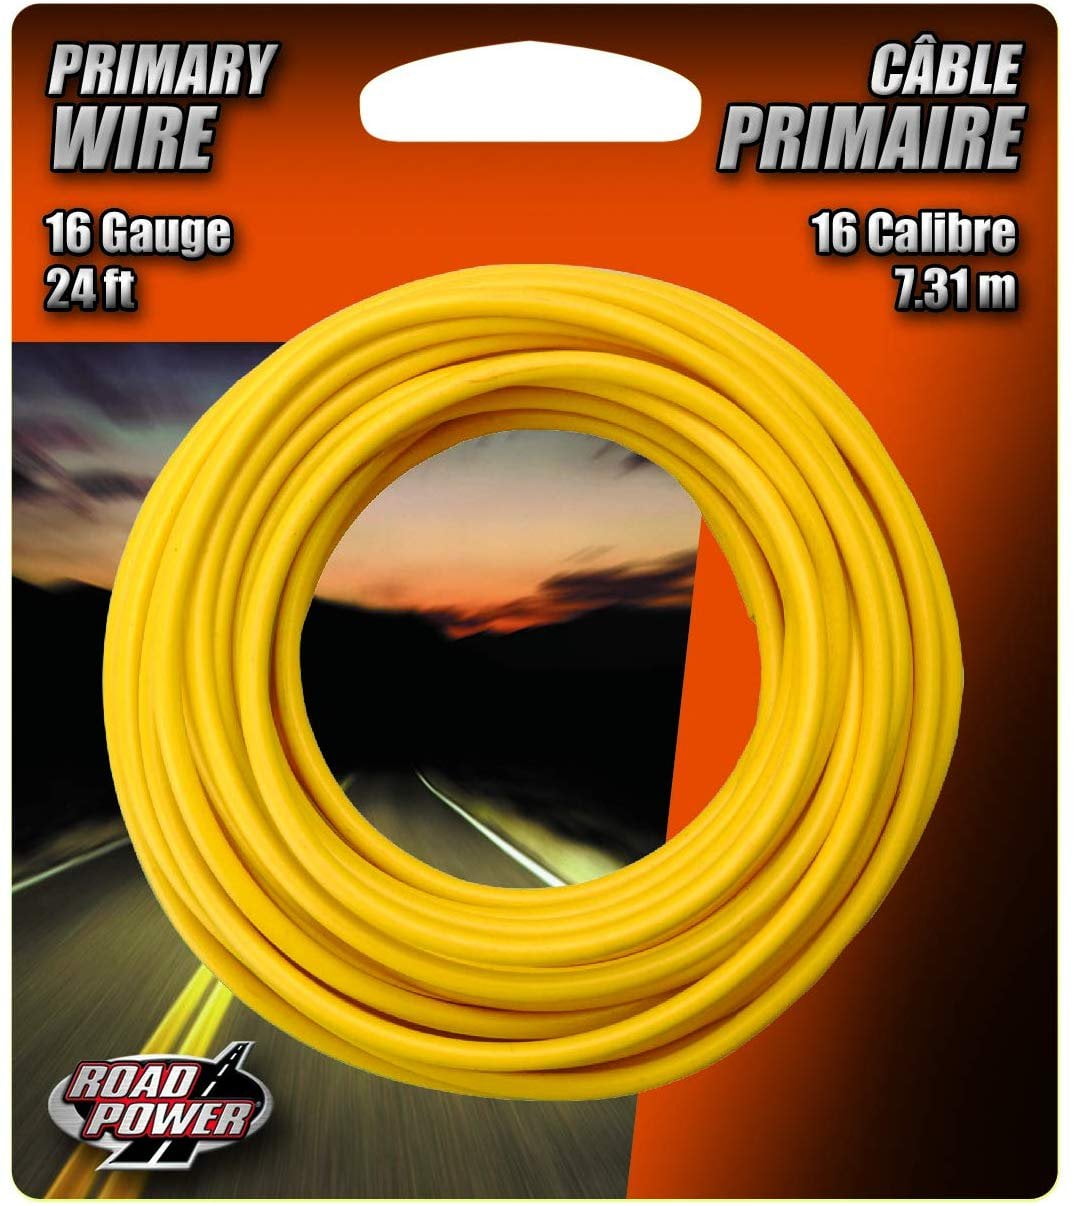 50Ft 16 Gauge AWG Primary Car Alarm Power Wire 12V Electronic Cable Yellow 